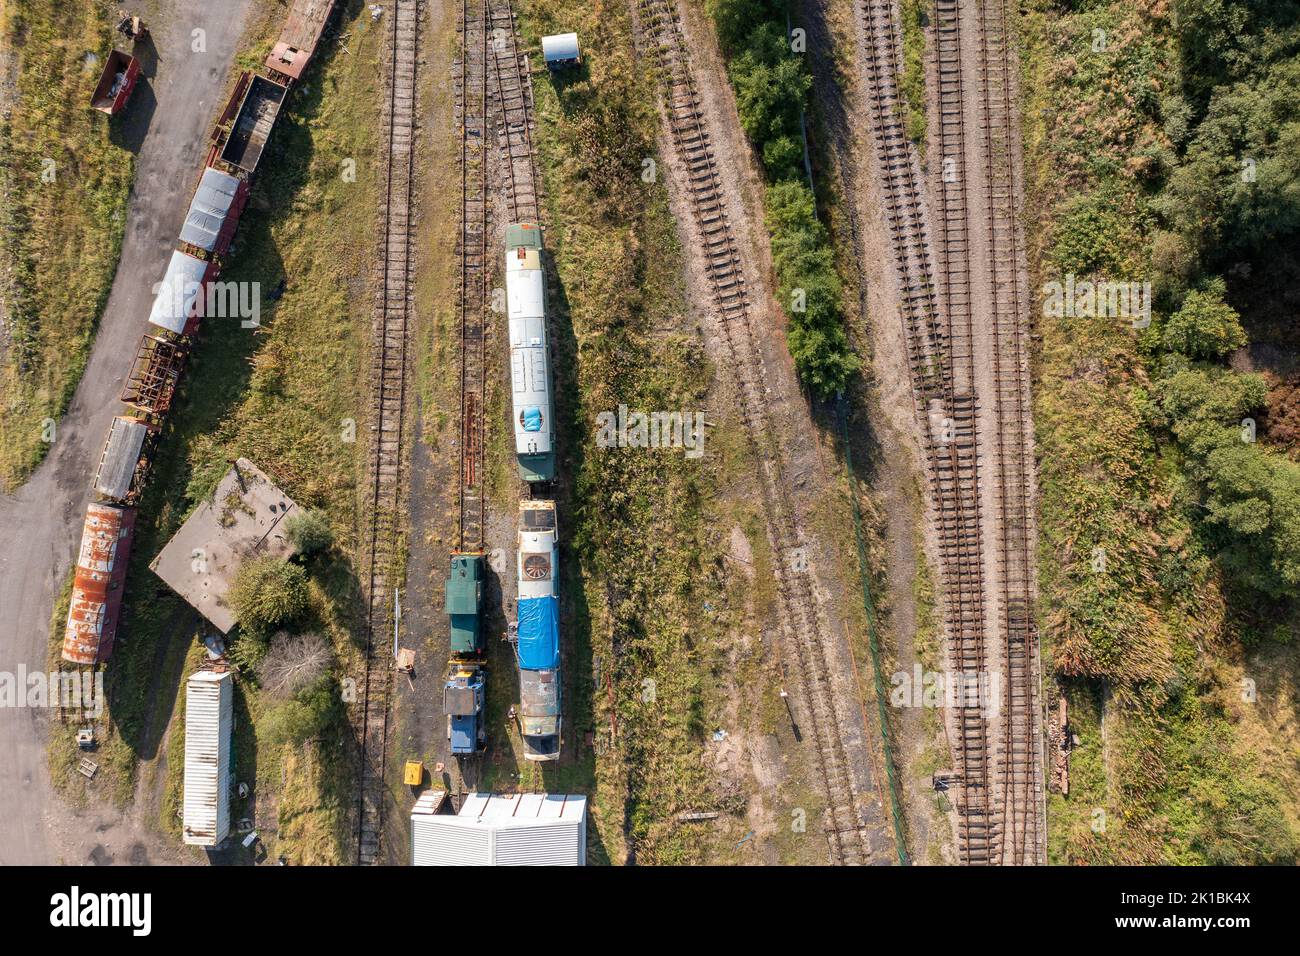 Aerial view above a Railroad Railway Track in South Wales Stock Photo